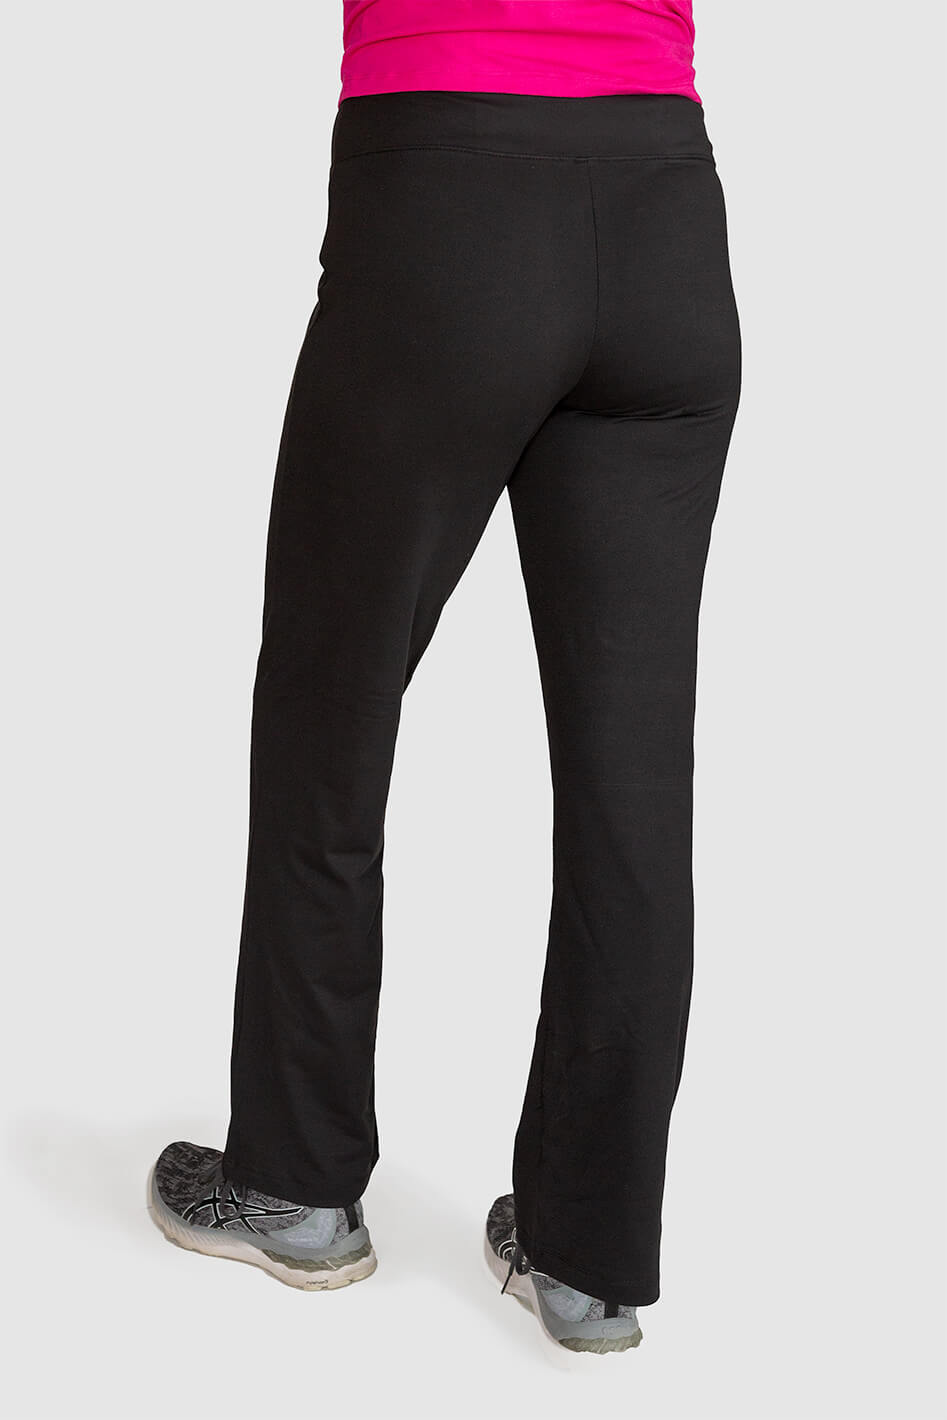 Everyday Active Pant is fitted through hip and thighs